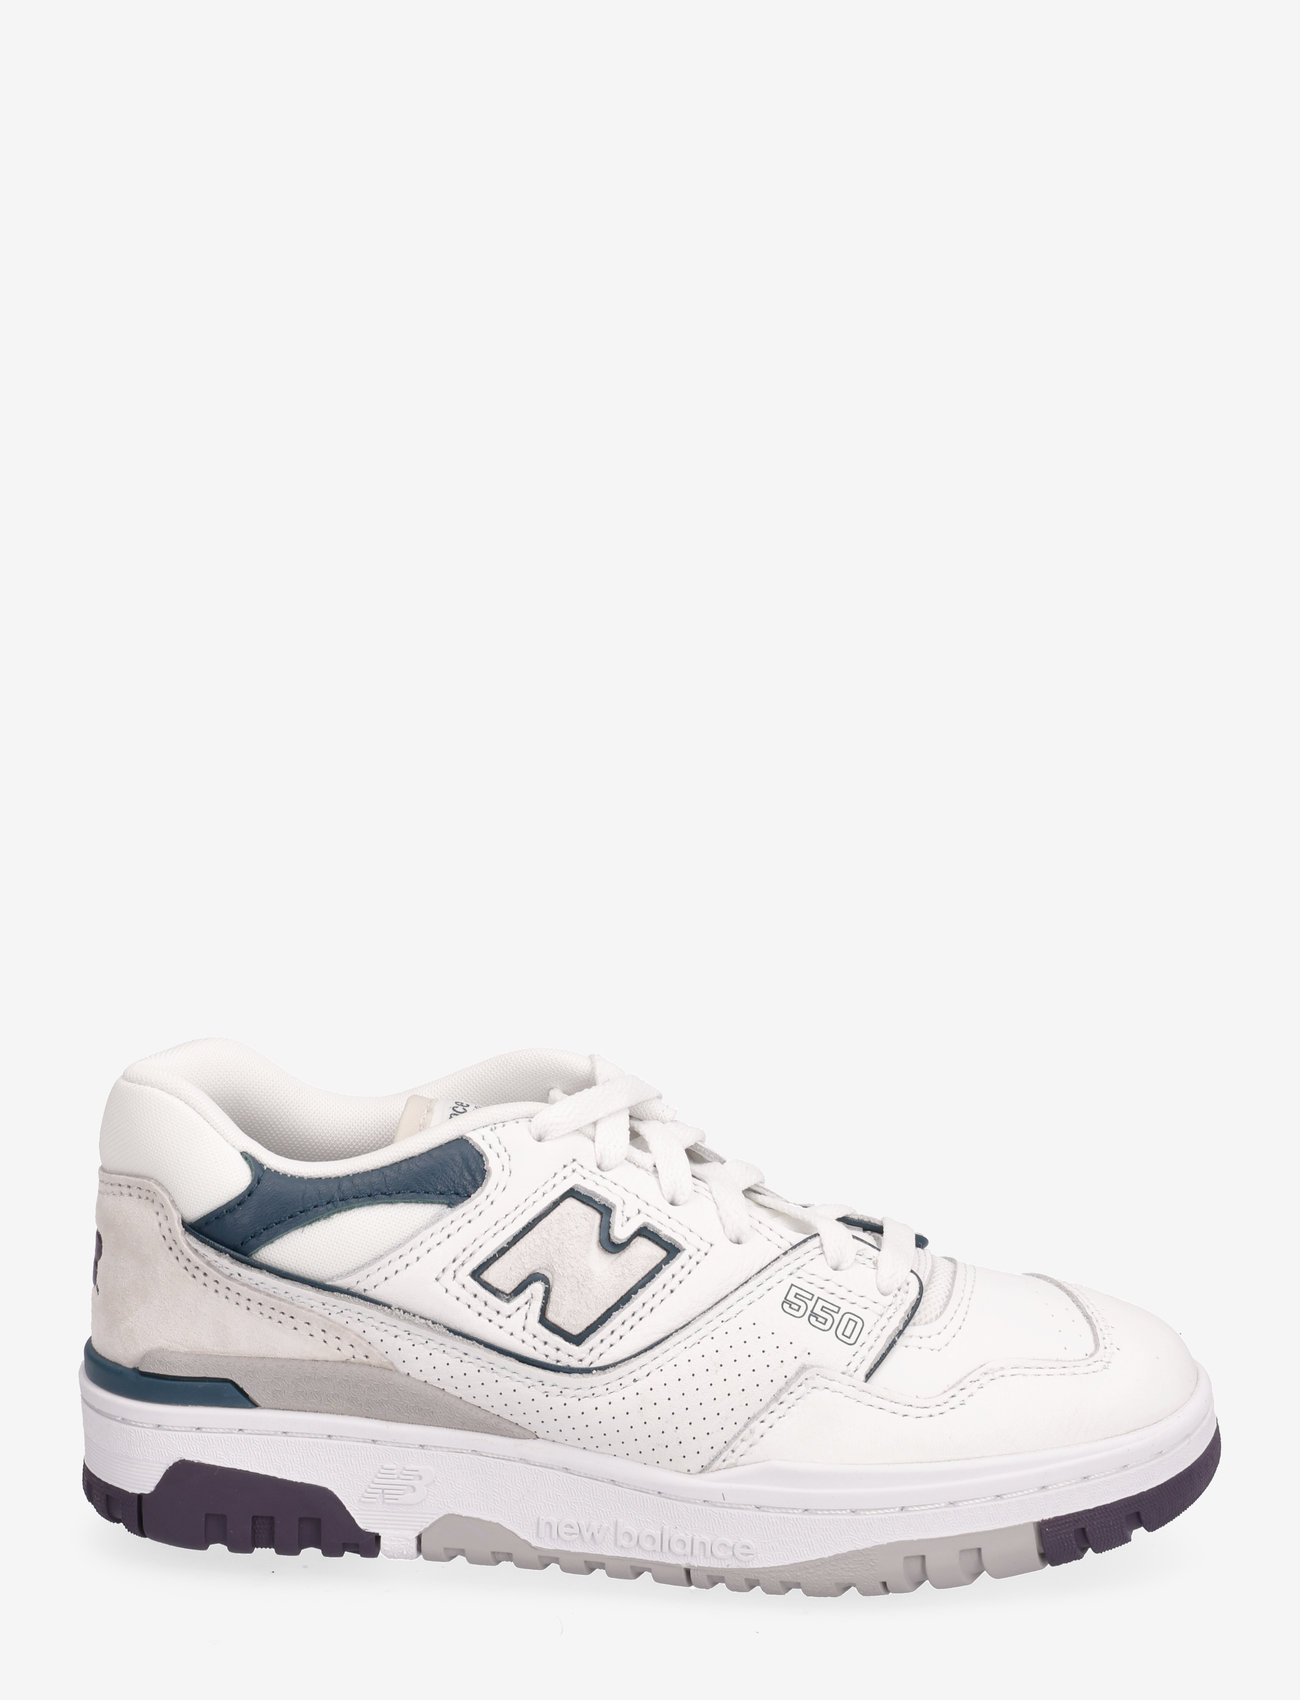 New Balance - New Balance BB550 - low top sneakers - white - 1